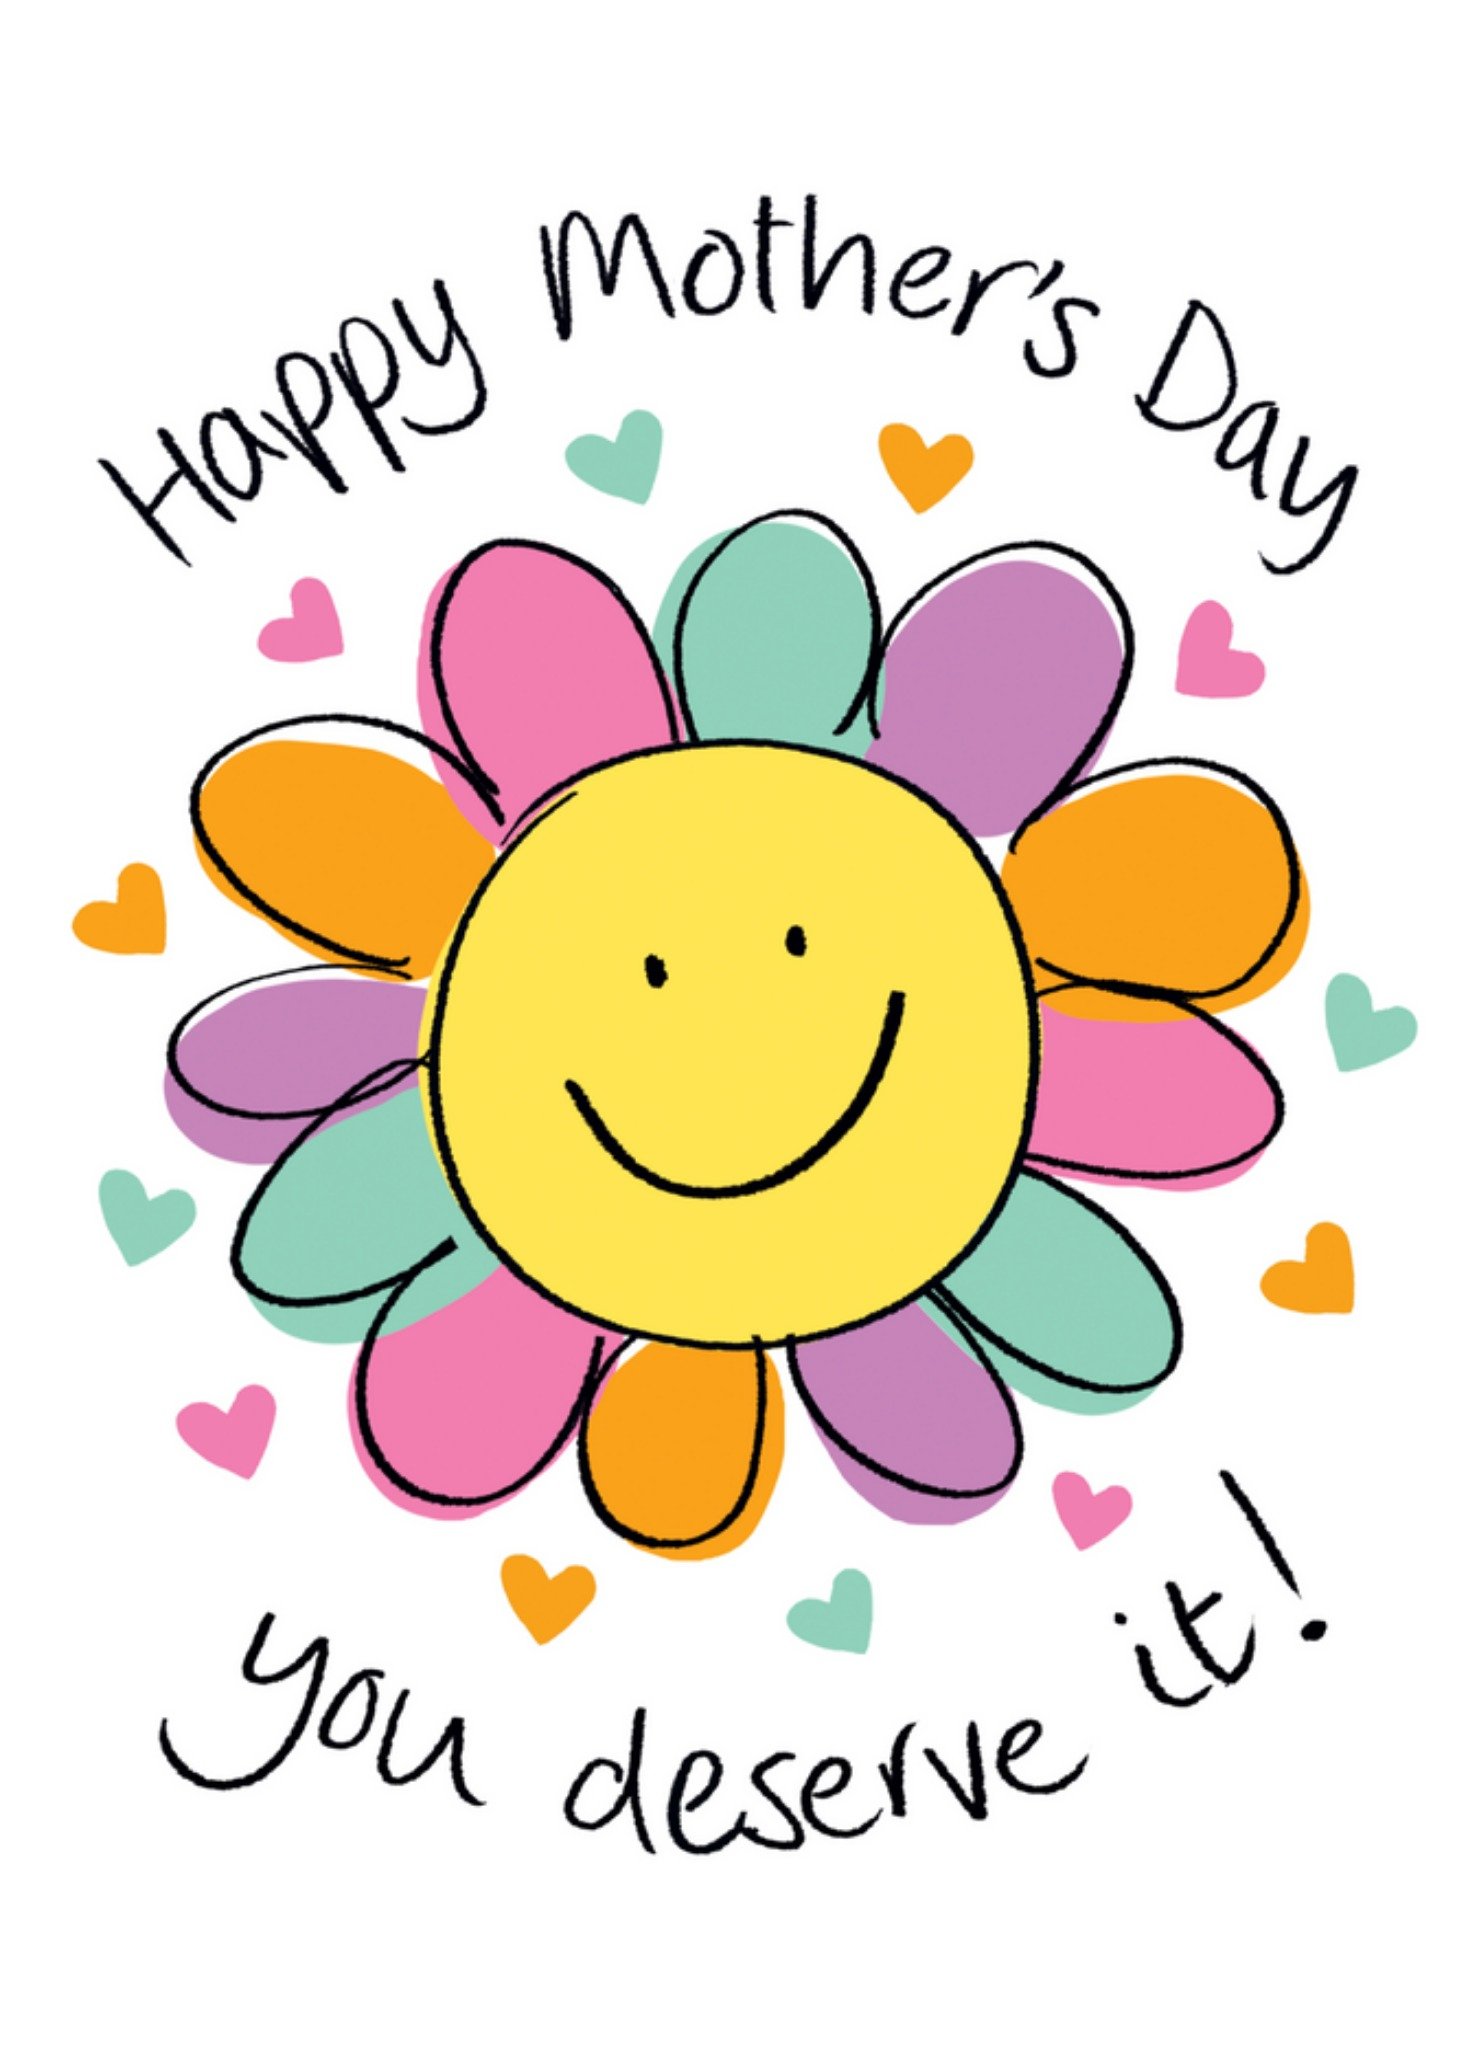 Moonpig Fun Bright Smiley Faced Flower Mother's Day Card, Large